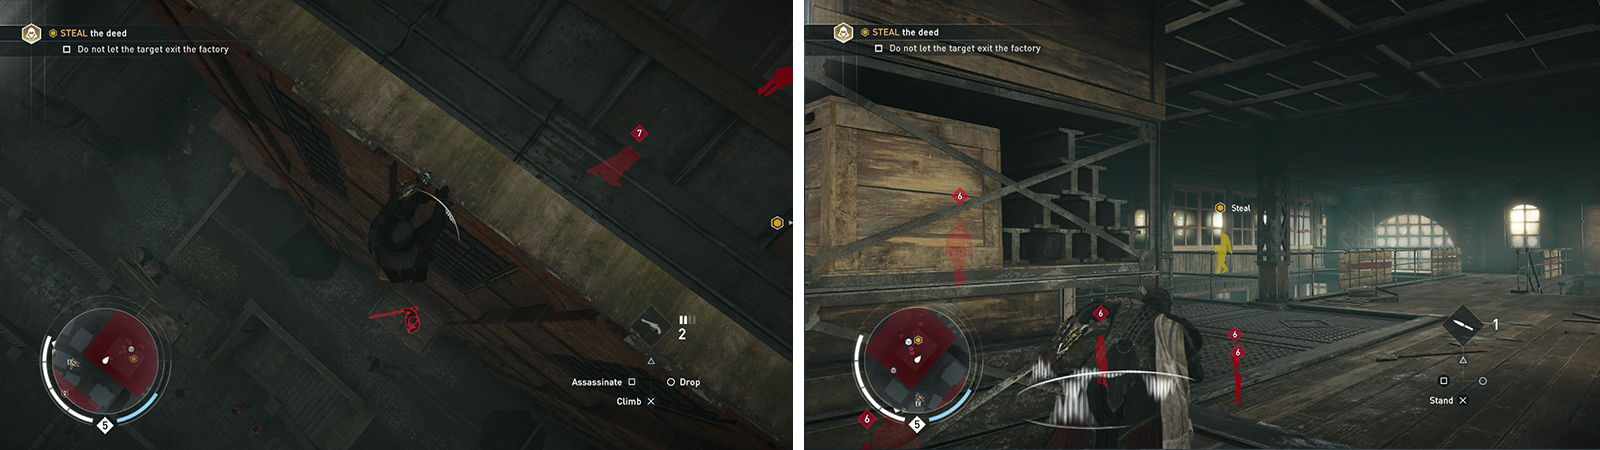 Find the Sniper on the south side of the factory (left) and use the entrance behind her. Sneak through the guards here to find the target in an office (right).